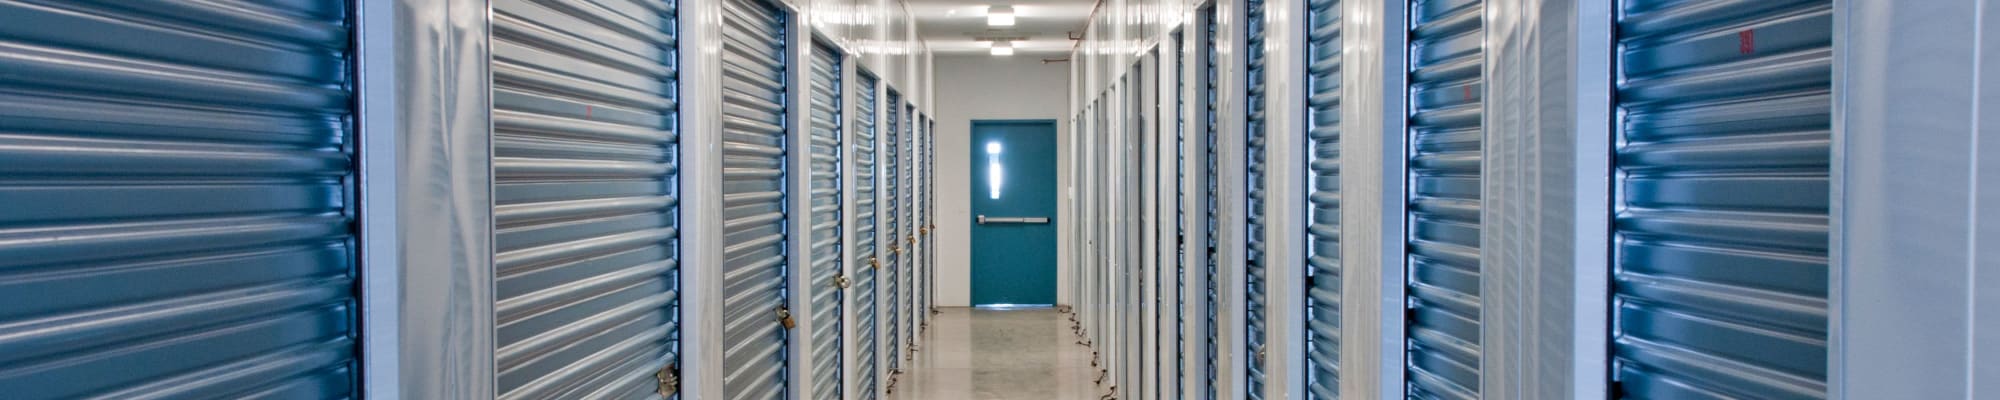 Self storage features at Storage Box Central in Ewing